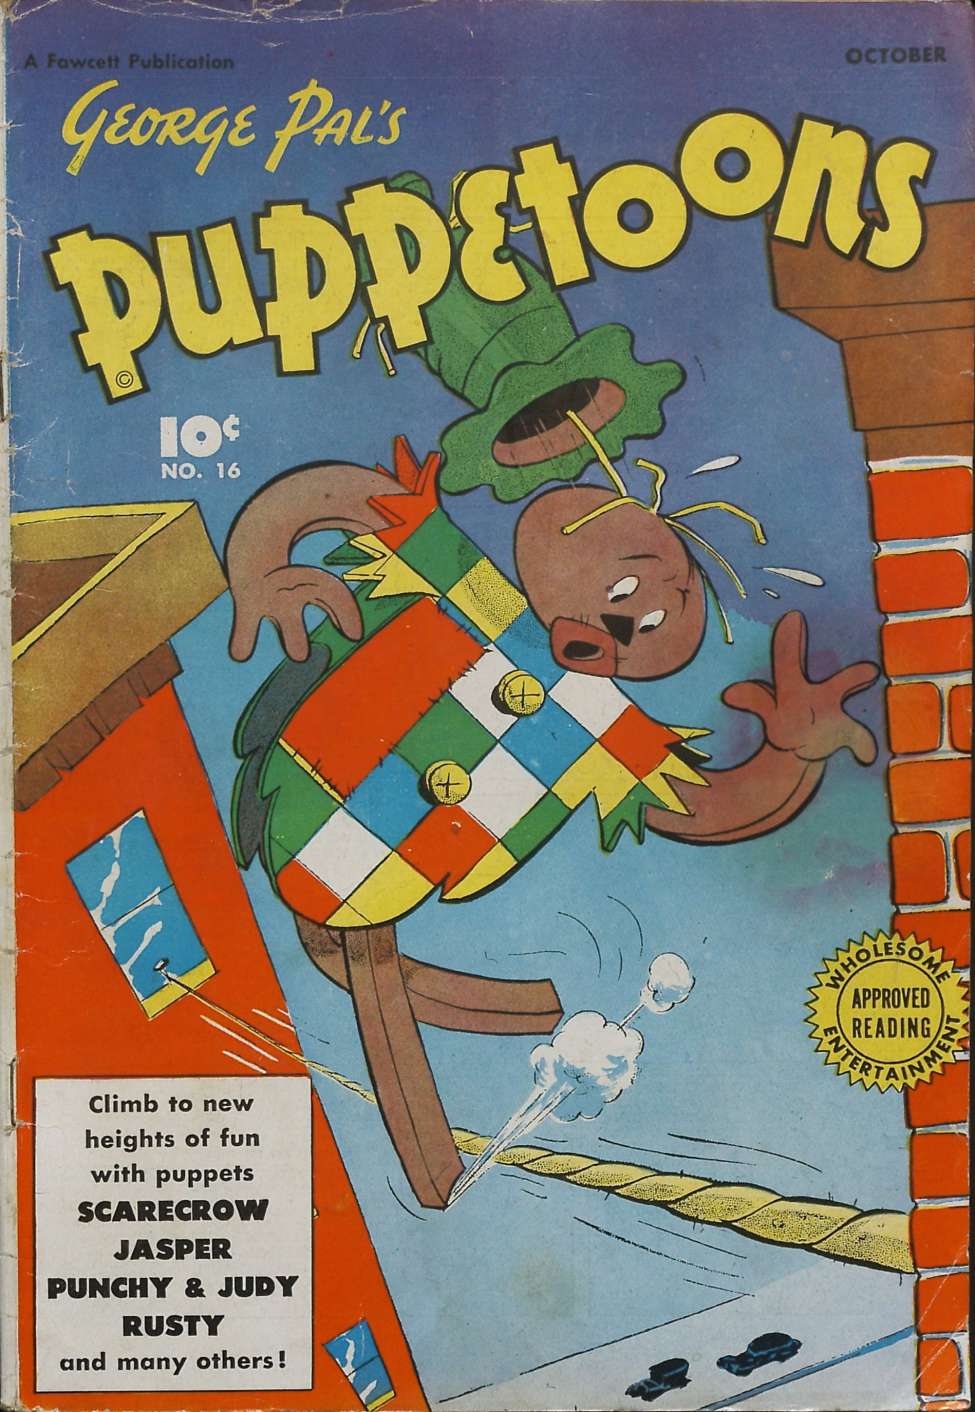 Book Cover For George Pal's Puppetoons 16